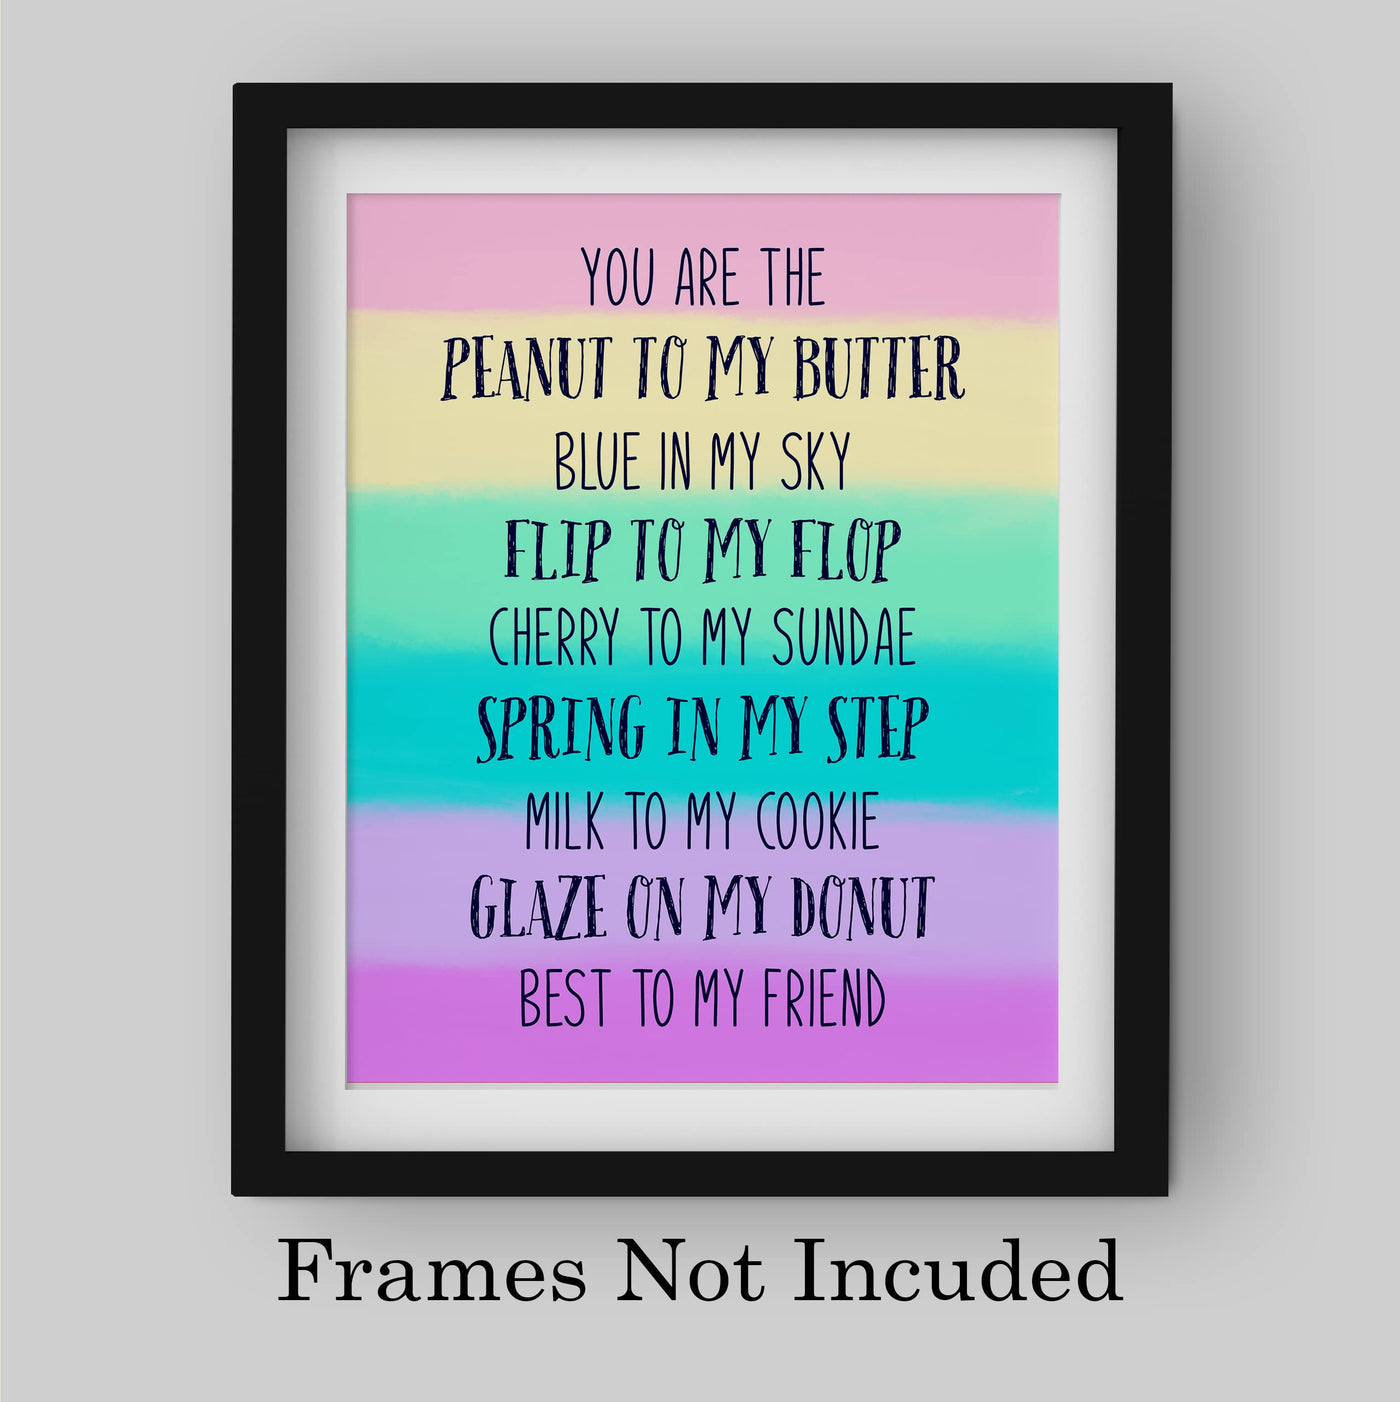 You Are The Peanut To My Butter Inspirational Friendship Sign -8 x 10" Typographic Wall Art. Love relationship Print-Ready to Frame. Home-Dorm Decor. Great Gift for Couples, Friends & BFF's!